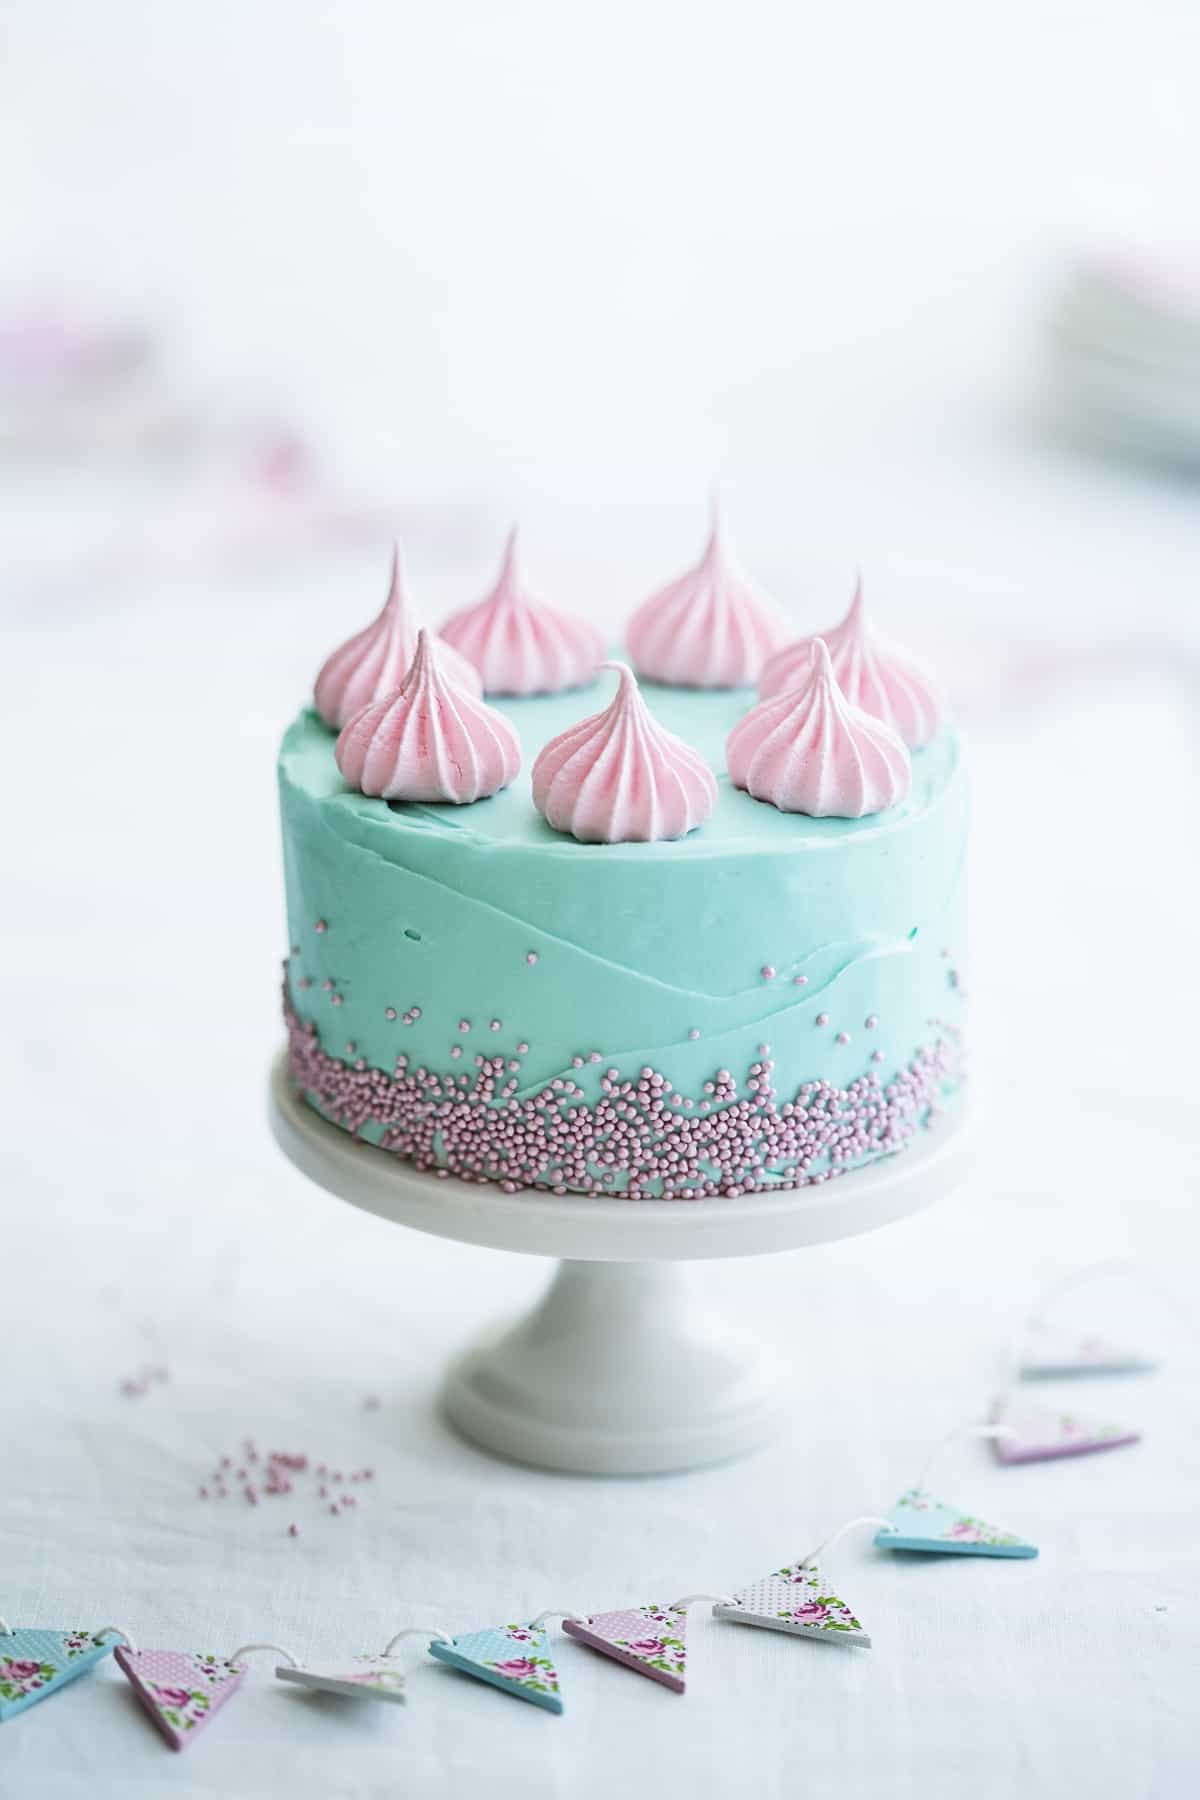 Blue and pink decorated cake.